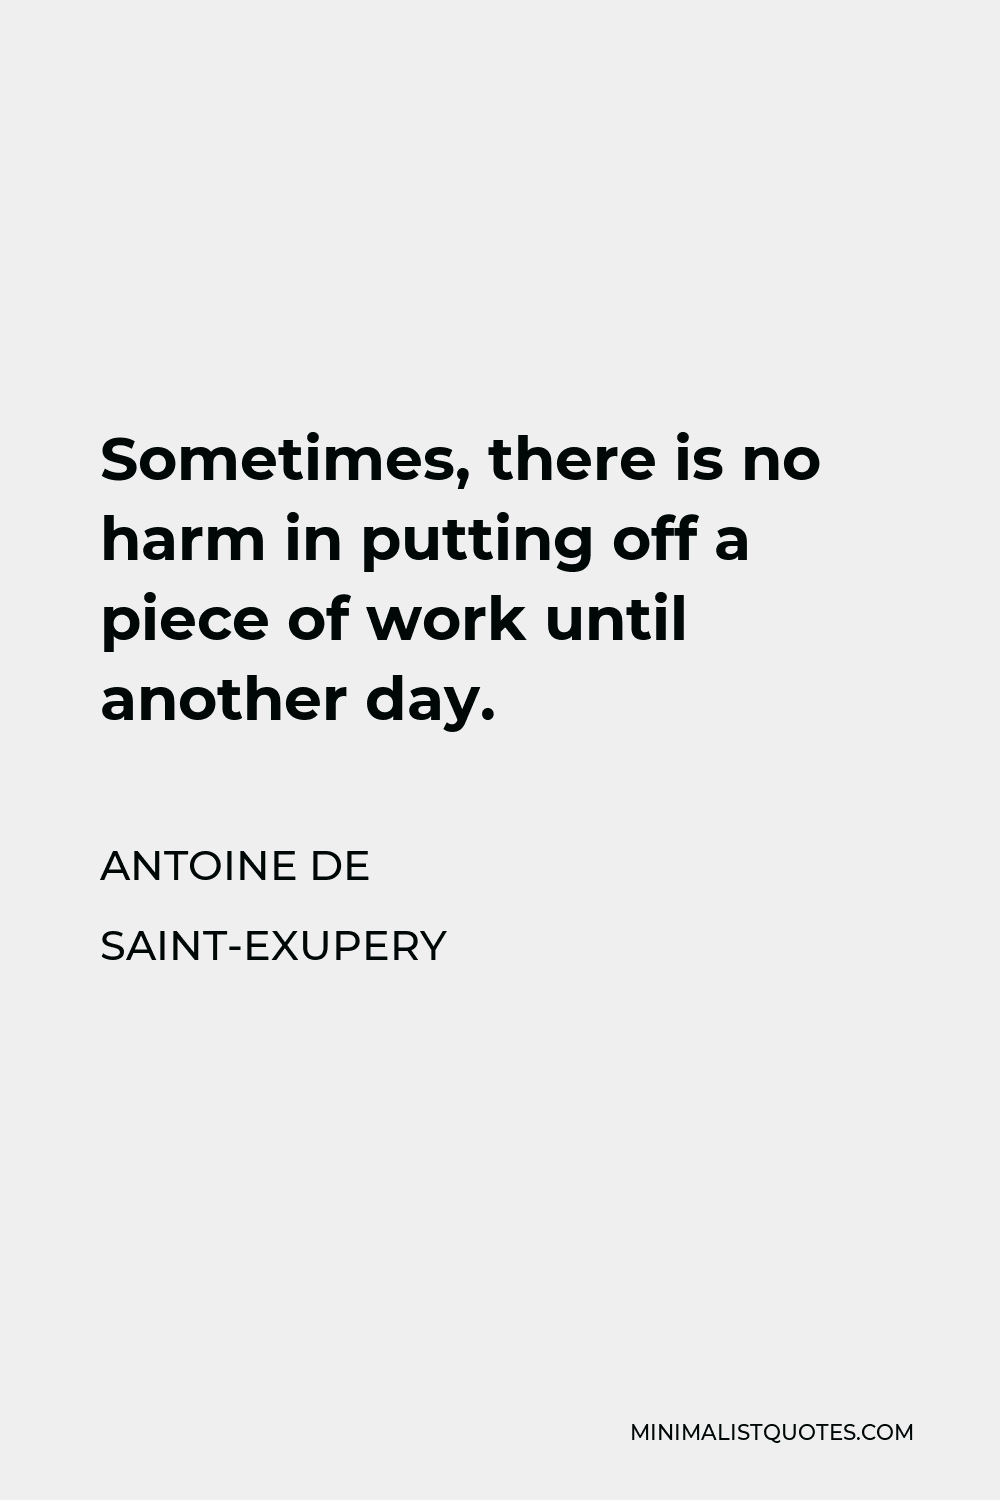 Antoine de Saint-Exupery Quote - Sometimes, there is no harm in putting off a piece of work until another day.